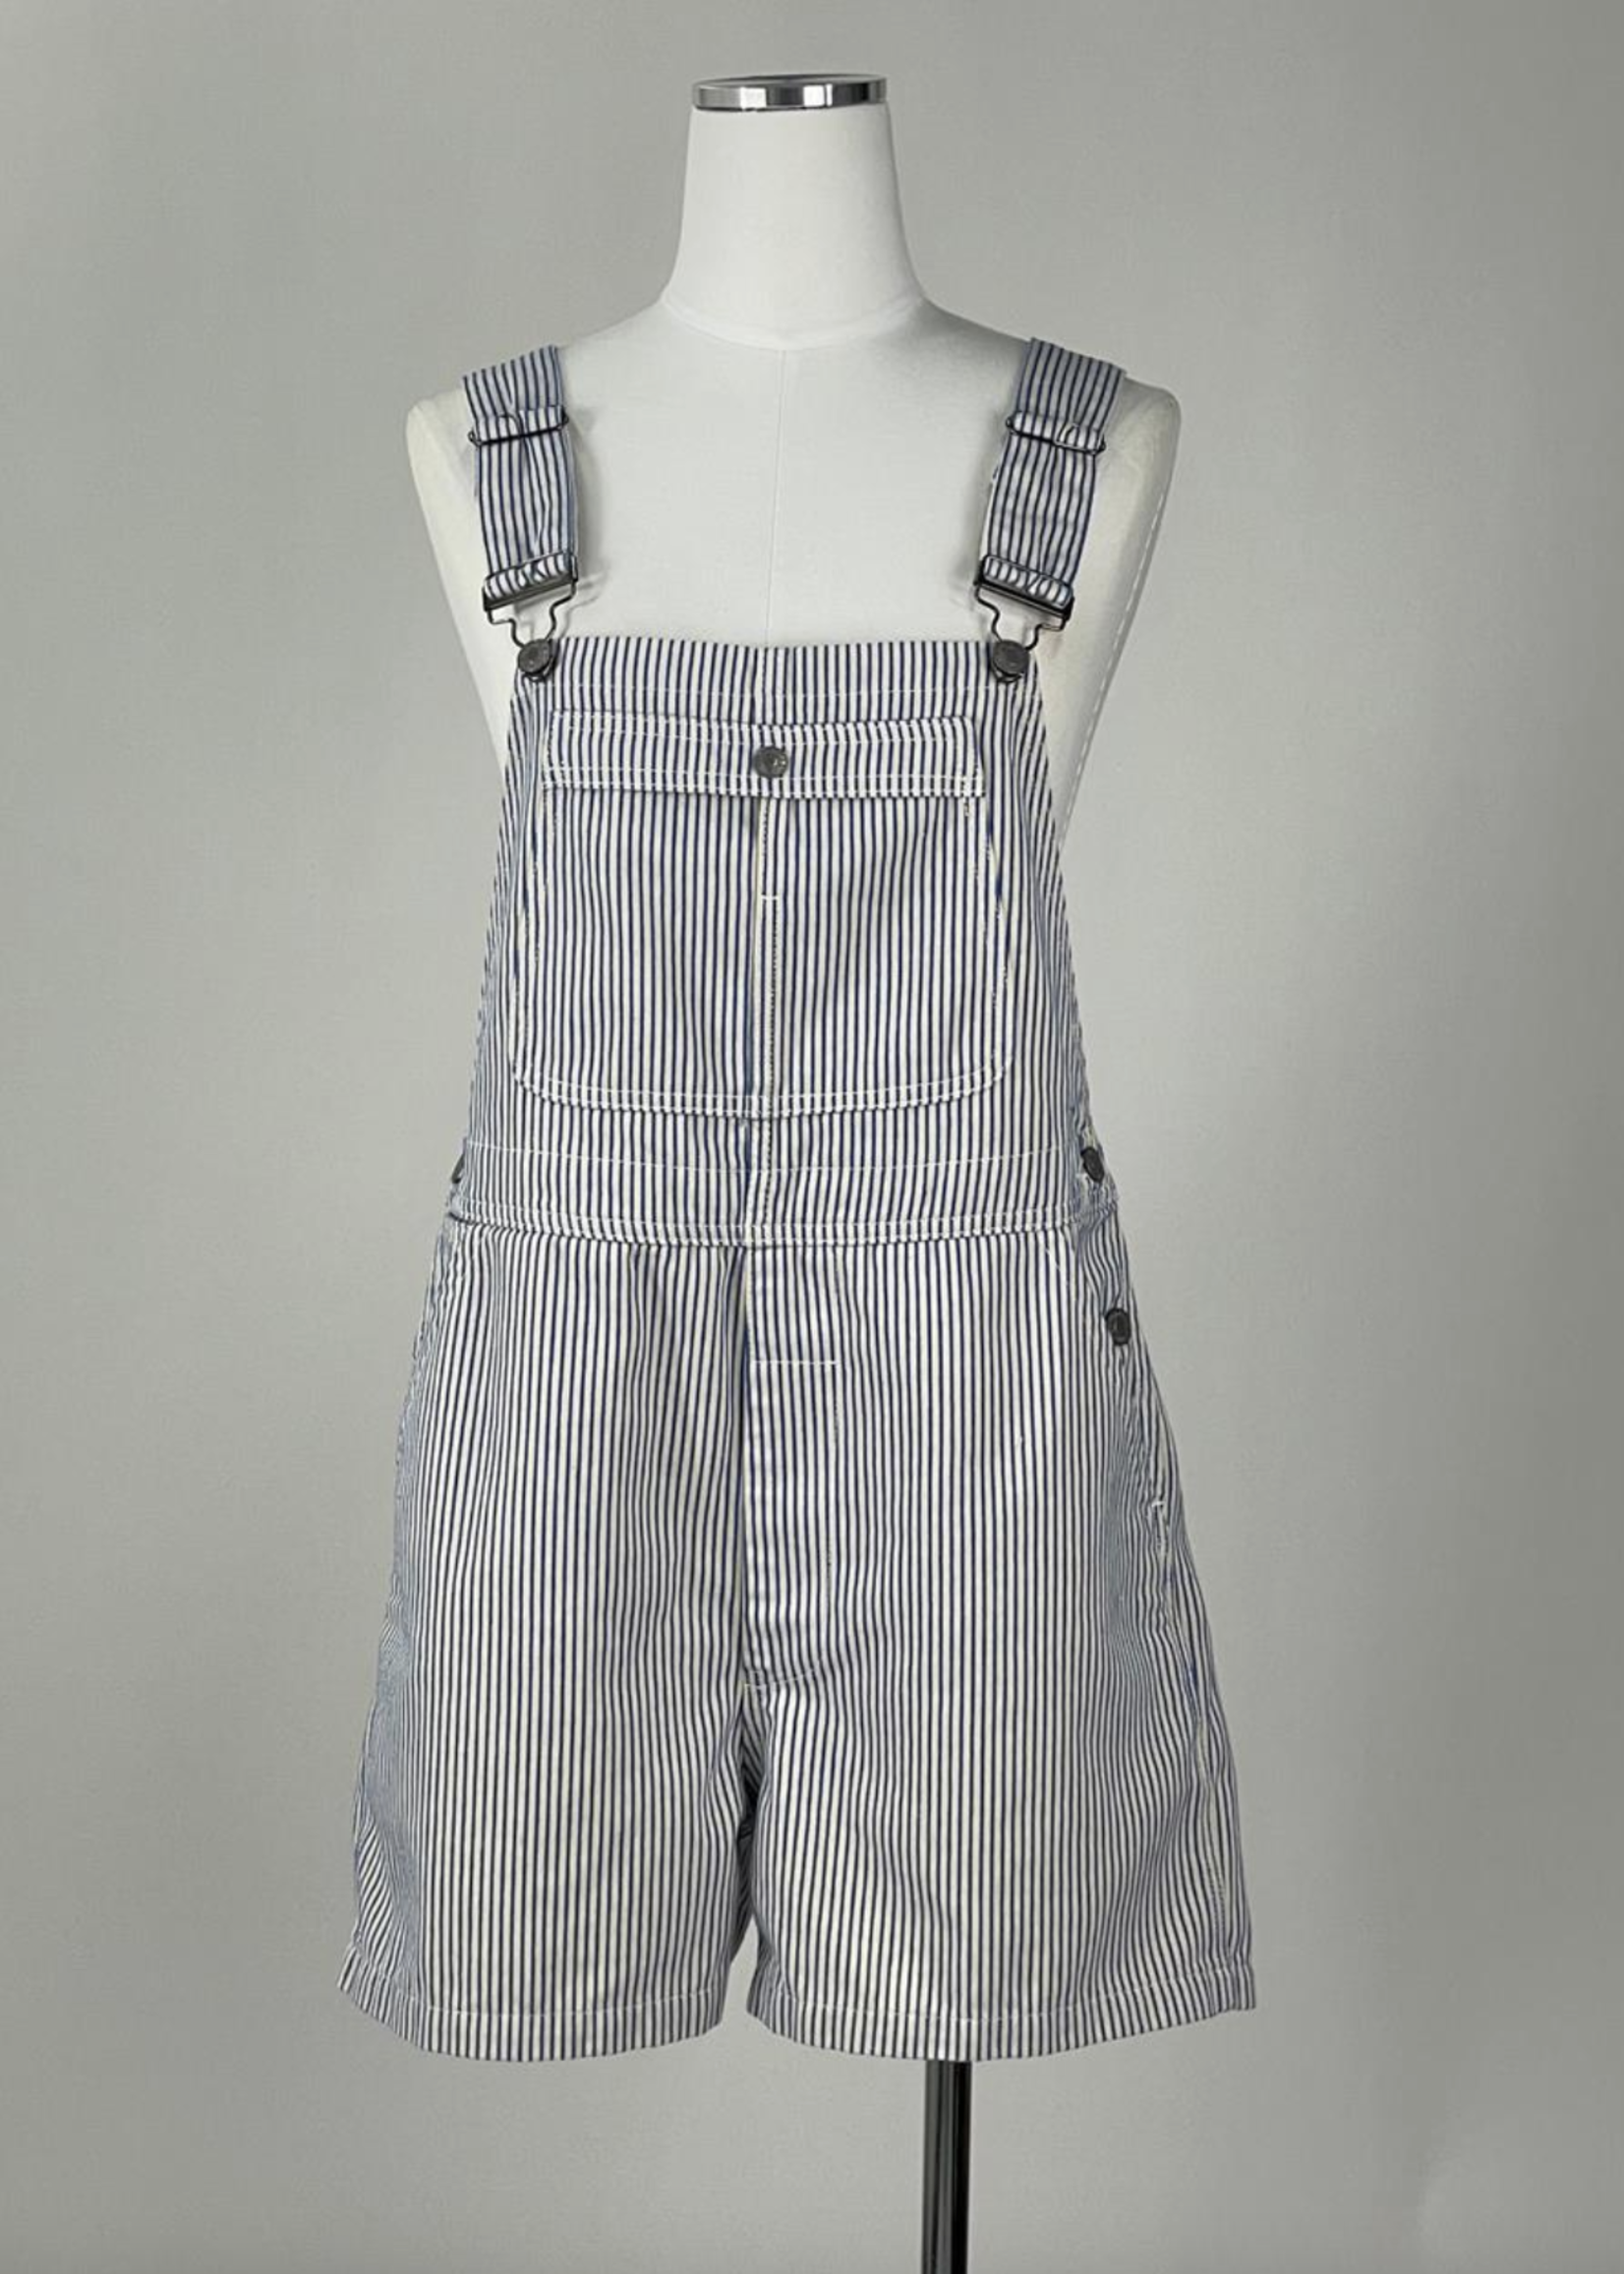 CHIT CHAT OVERALLS